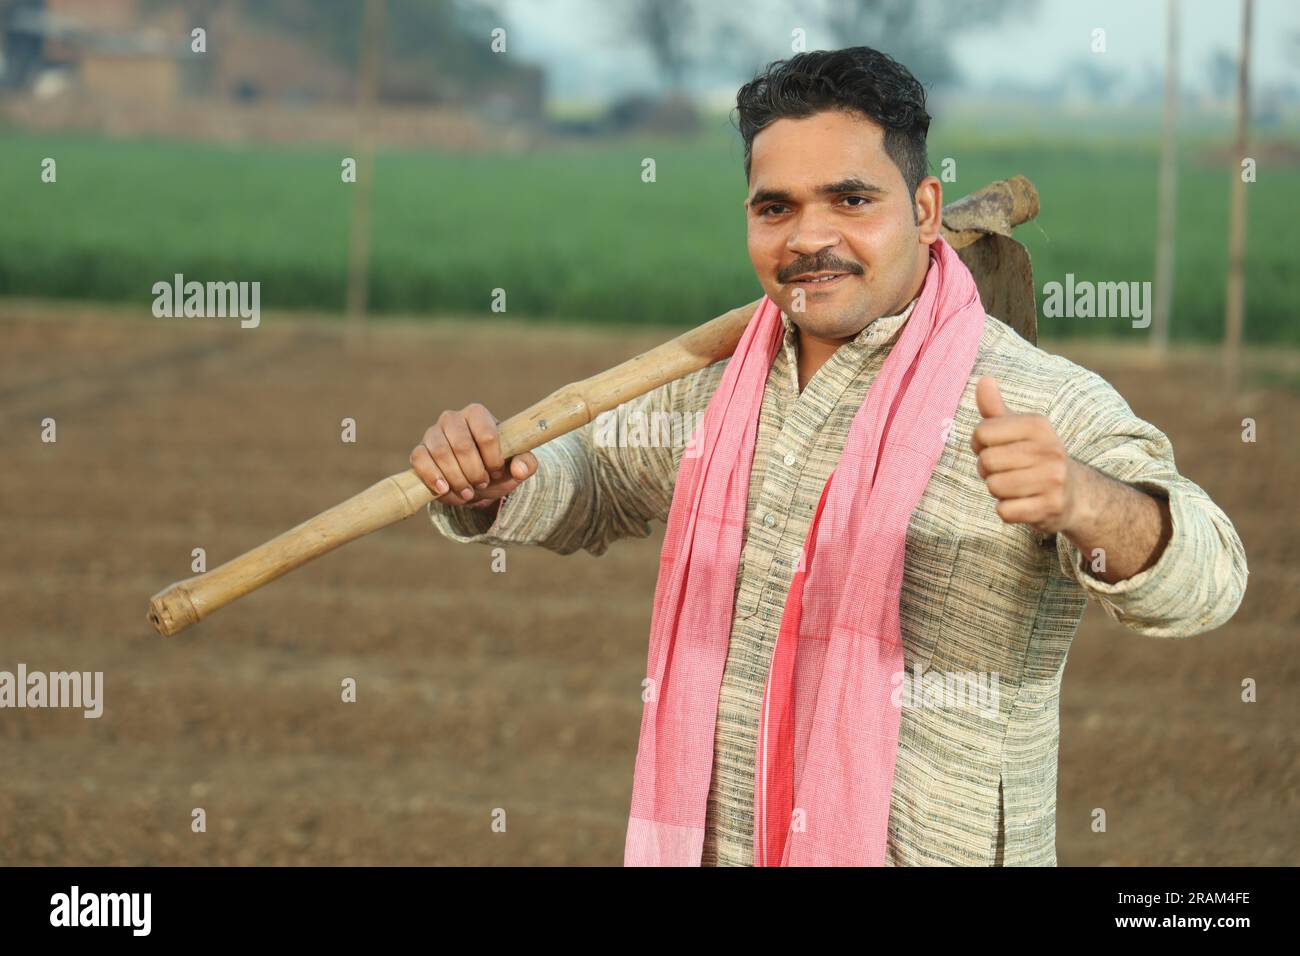 Portrait of Indian happy farmer ploughing the field manually in a day time. Holding agricultural tool in hand. Digging tool shovel and hoe in hand. Stock Photo